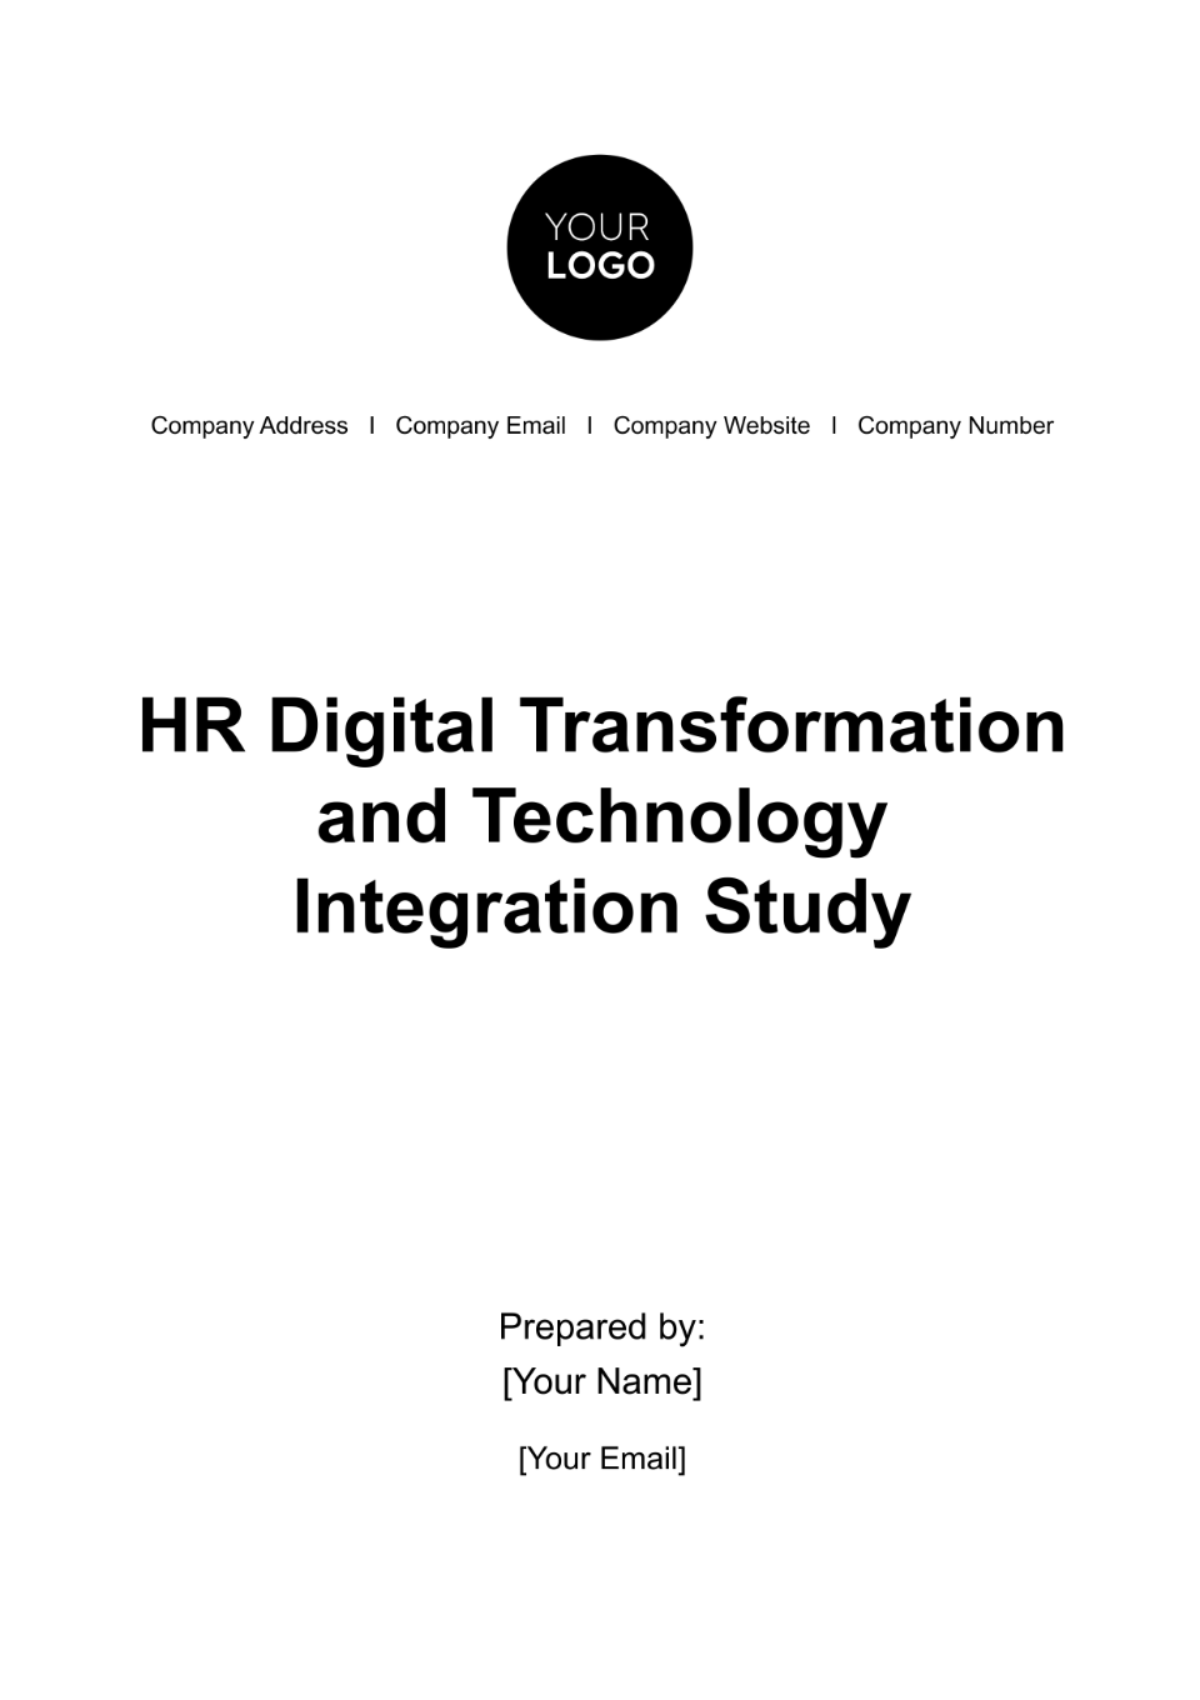 HR Digital Transformation and Technology Integration Study Template